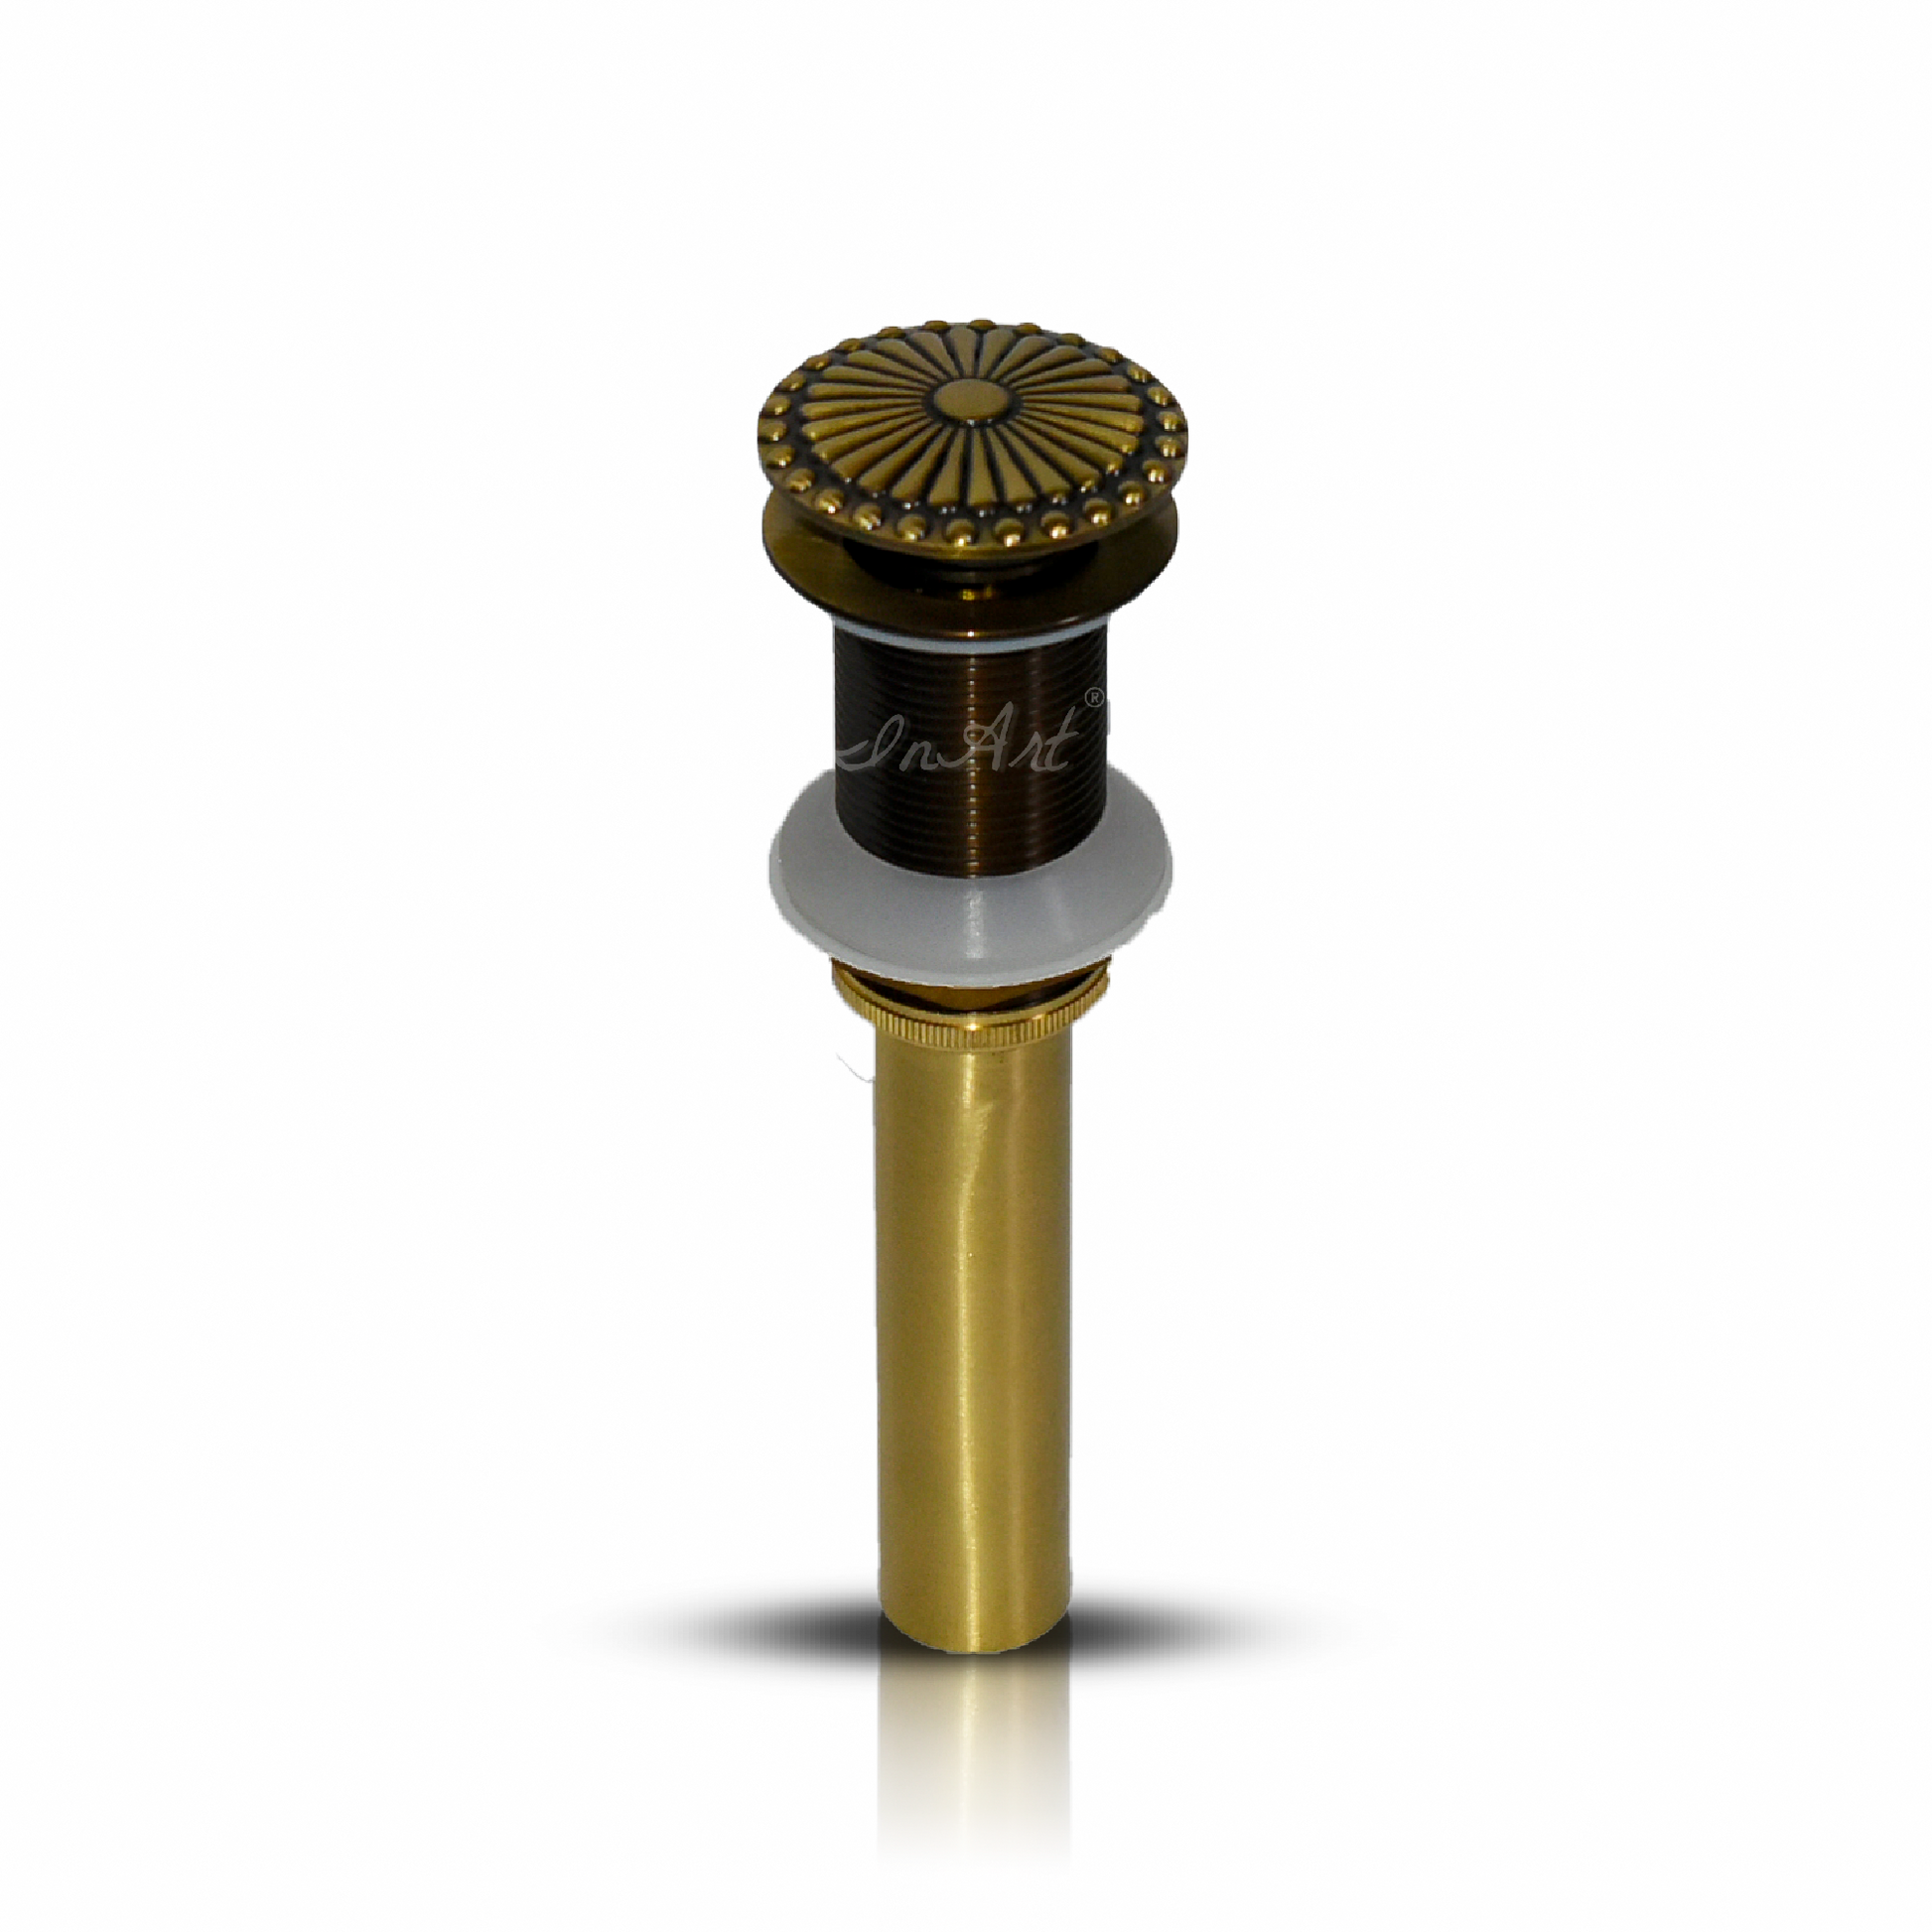 InArt Brass Full Threaded Pop Up Waste Coupling 32 MM 5", Brass Top Antique Gold Color - InArt-Studio